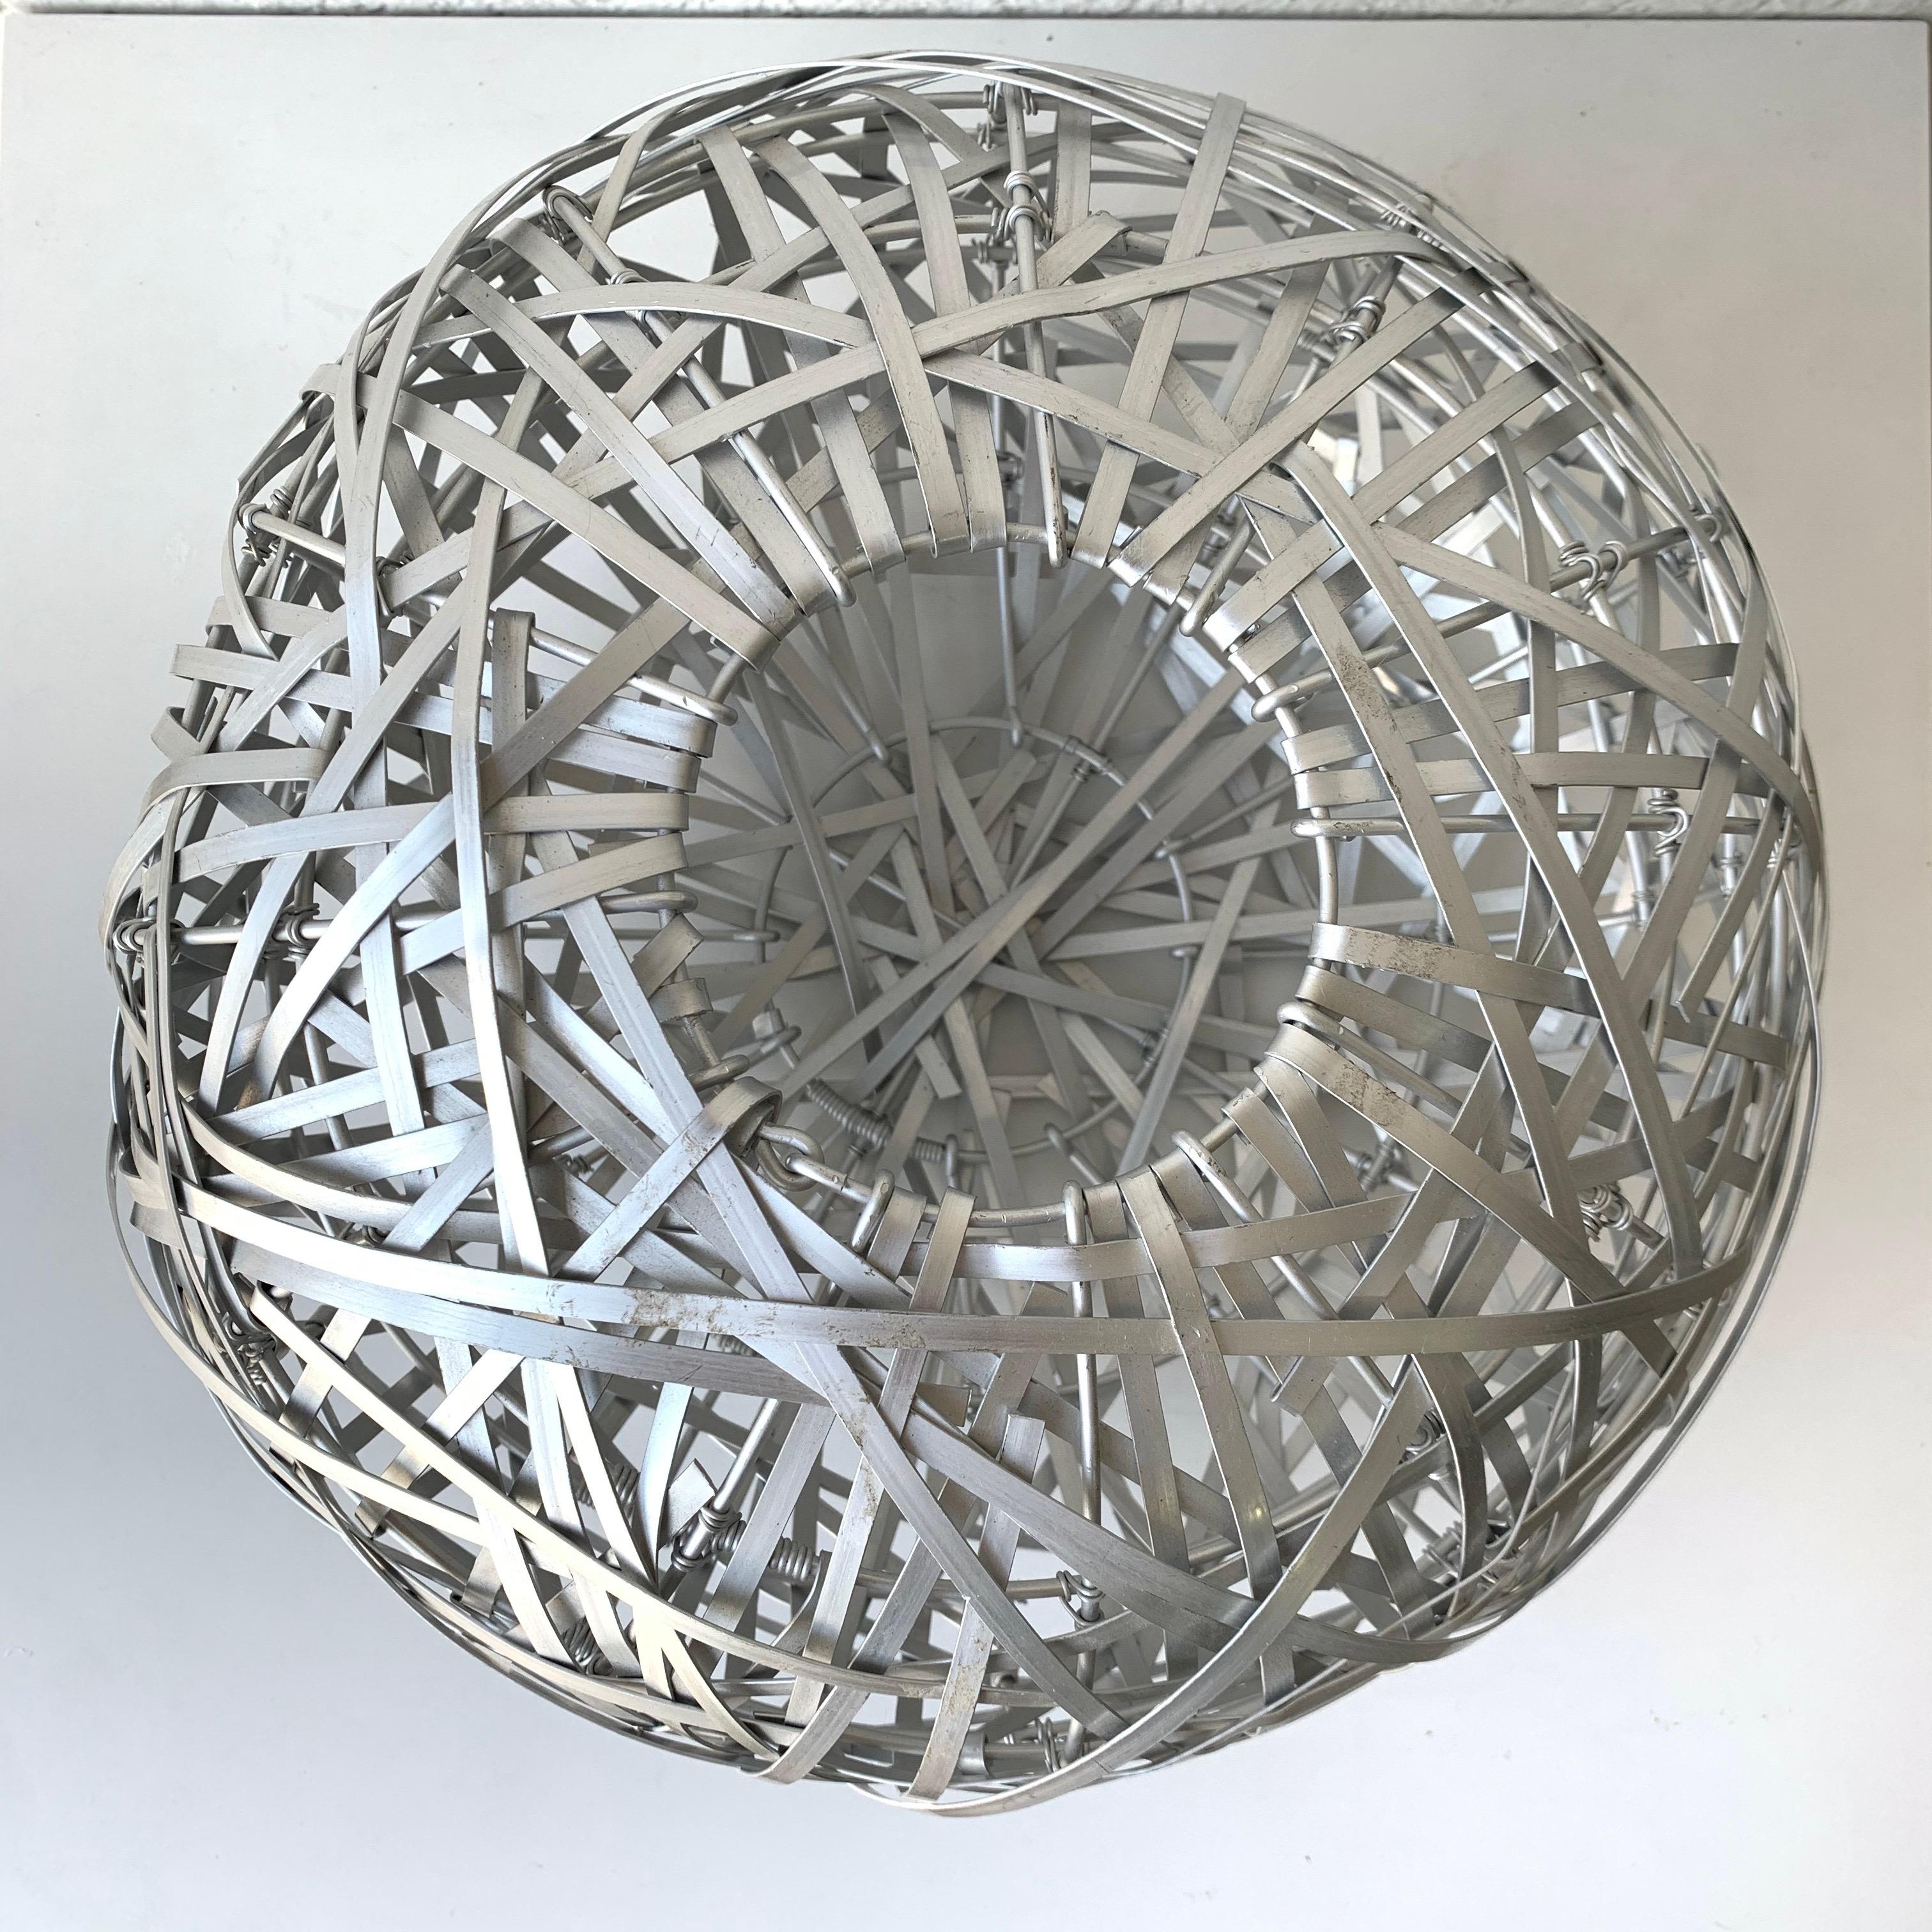 Modern sculptural basket, bowl, vase, or object rendered in woven aluminum, attributed to Humberto and Fernando Campana, Brazil, 1990s.